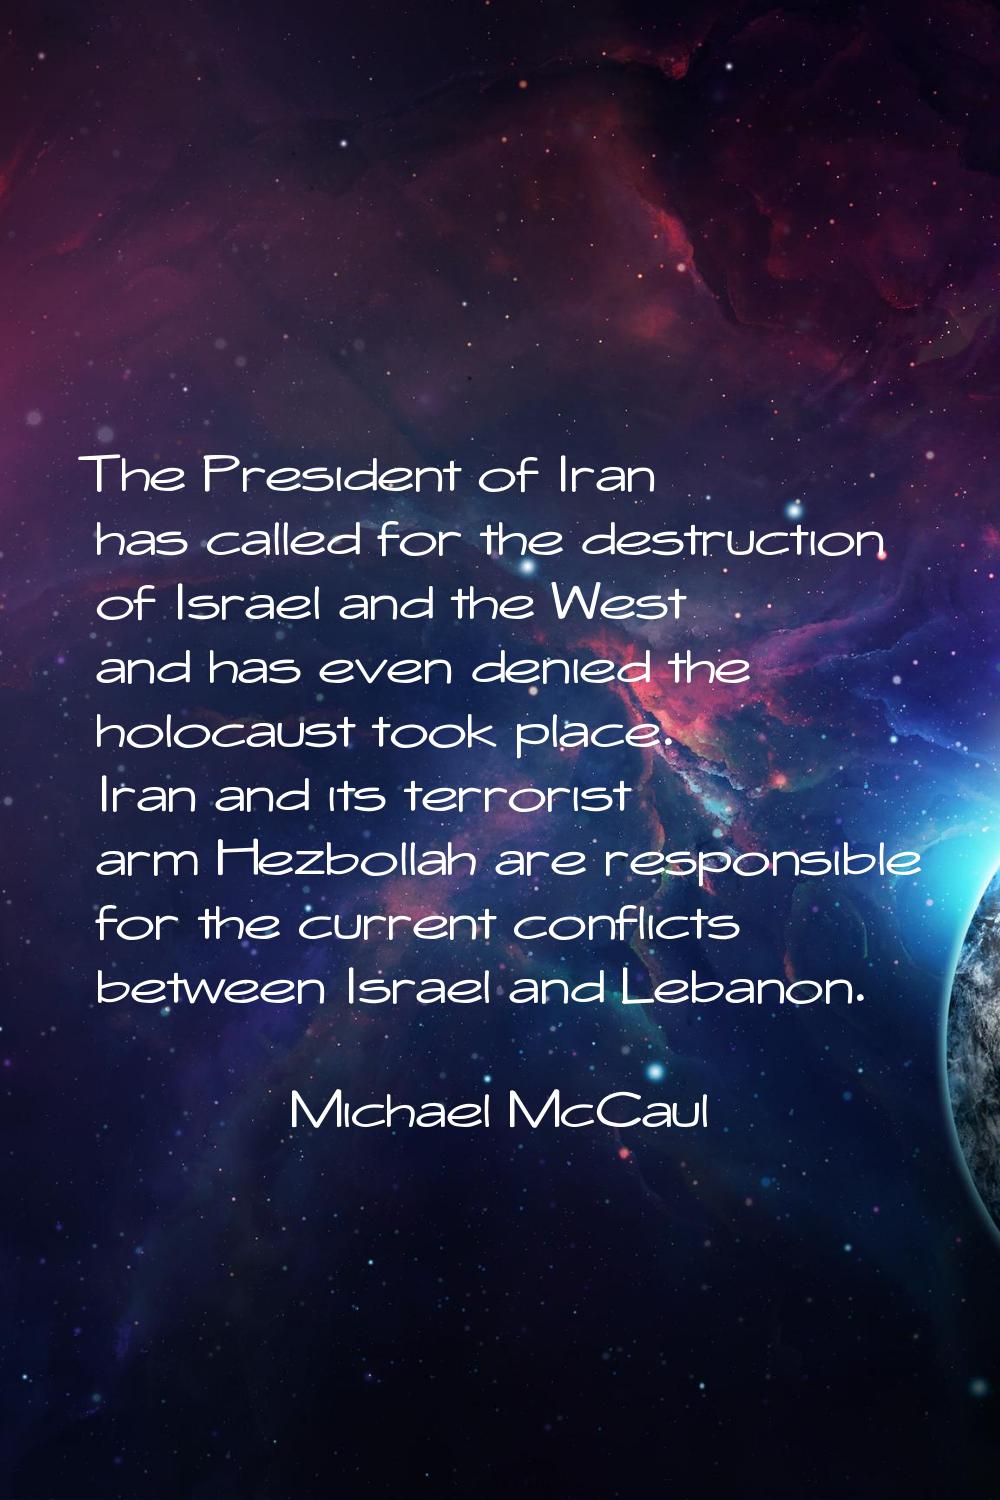 The President of Iran has called for the destruction of Israel and the West and has even denied the